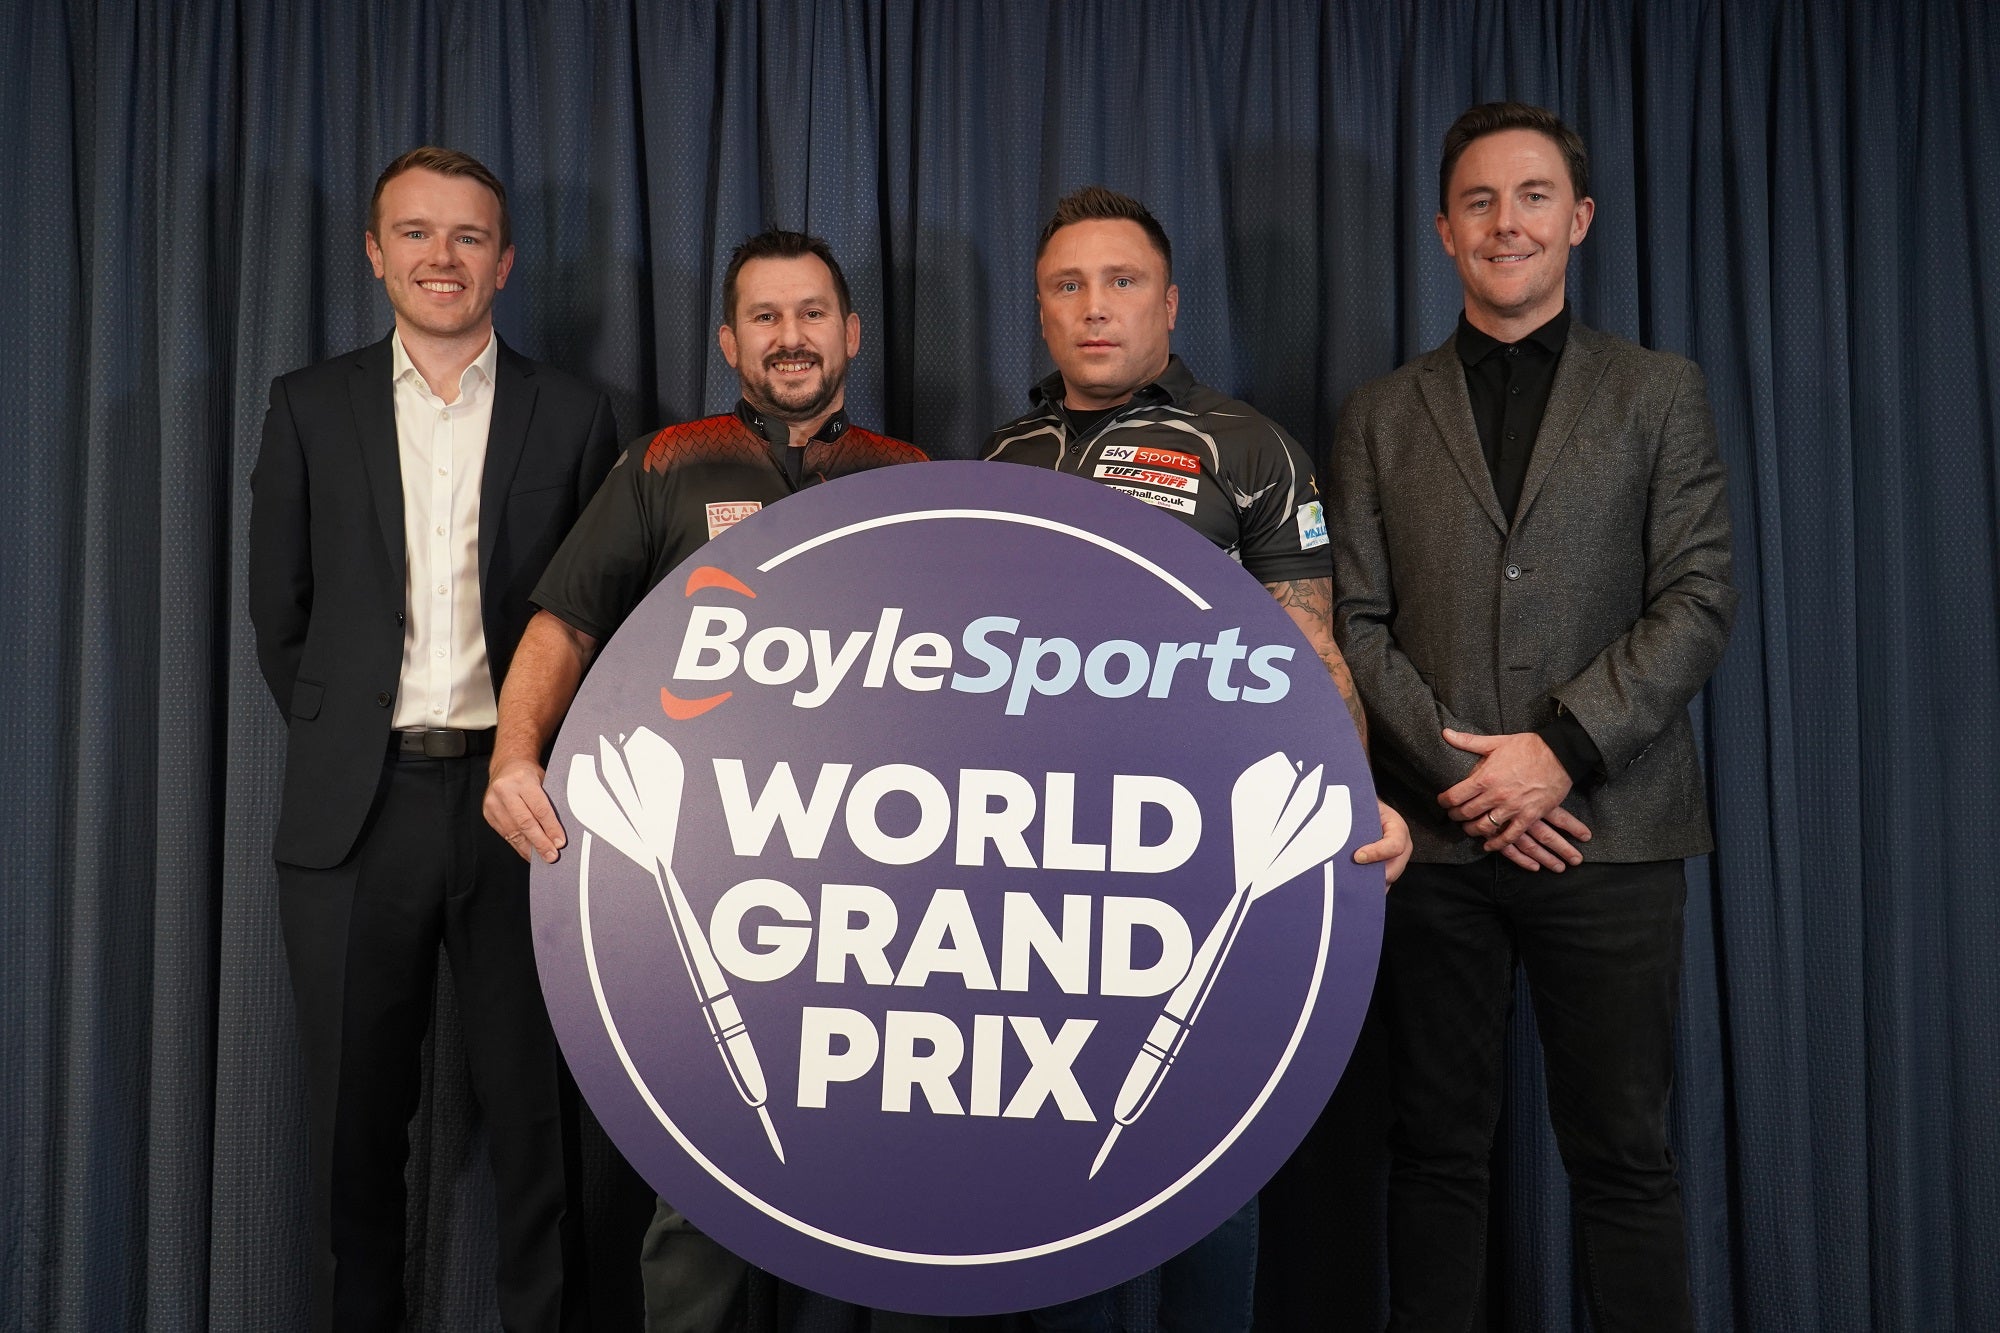 BoyleSports extend World Grand Prix sponsorship until 2024 with new deal